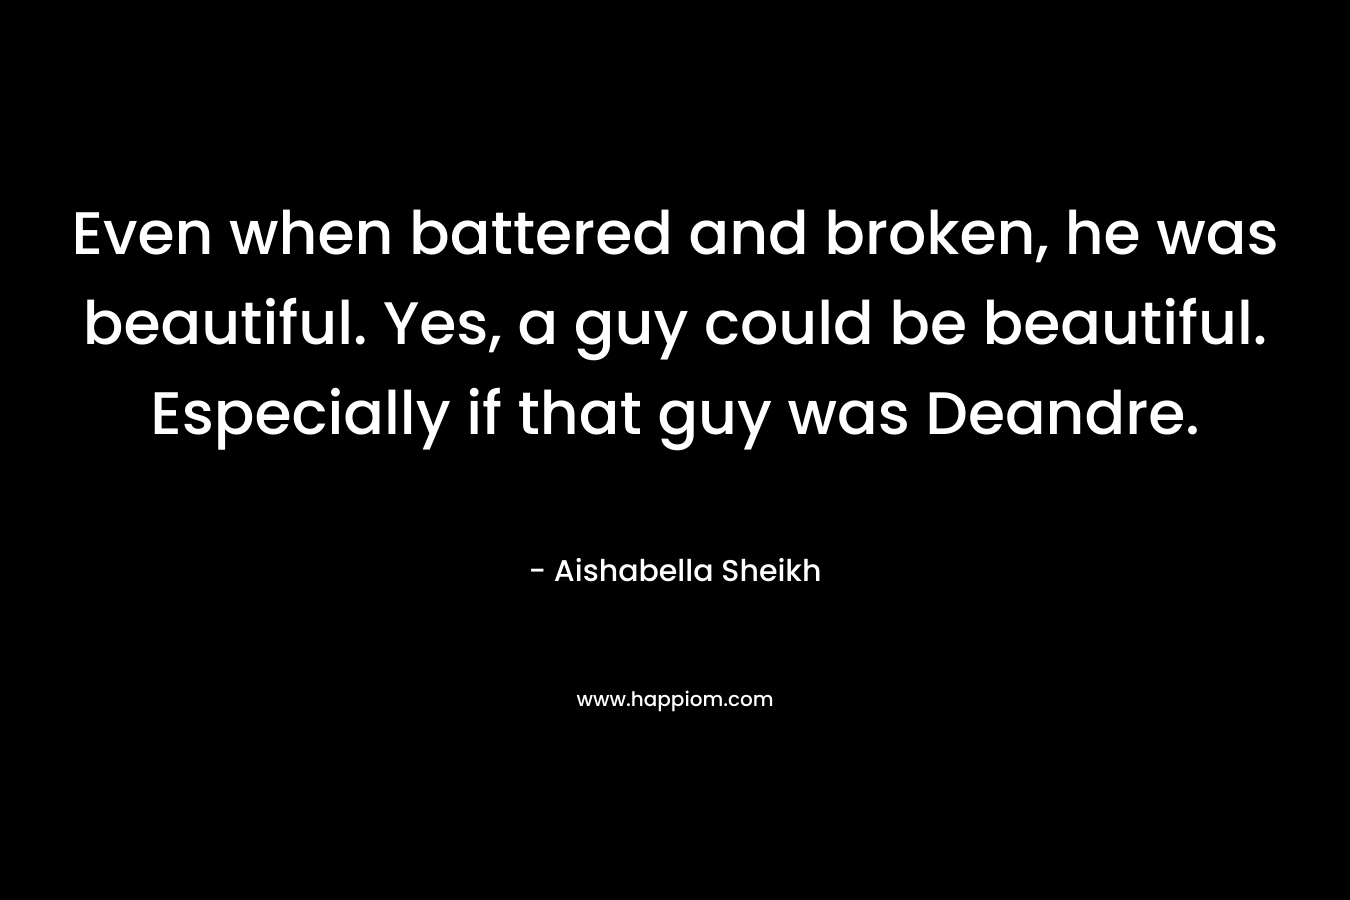 Even when battered and broken, he was beautiful. Yes, a guy could be beautiful. Especially if that guy was Deandre. – Aishabella Sheikh